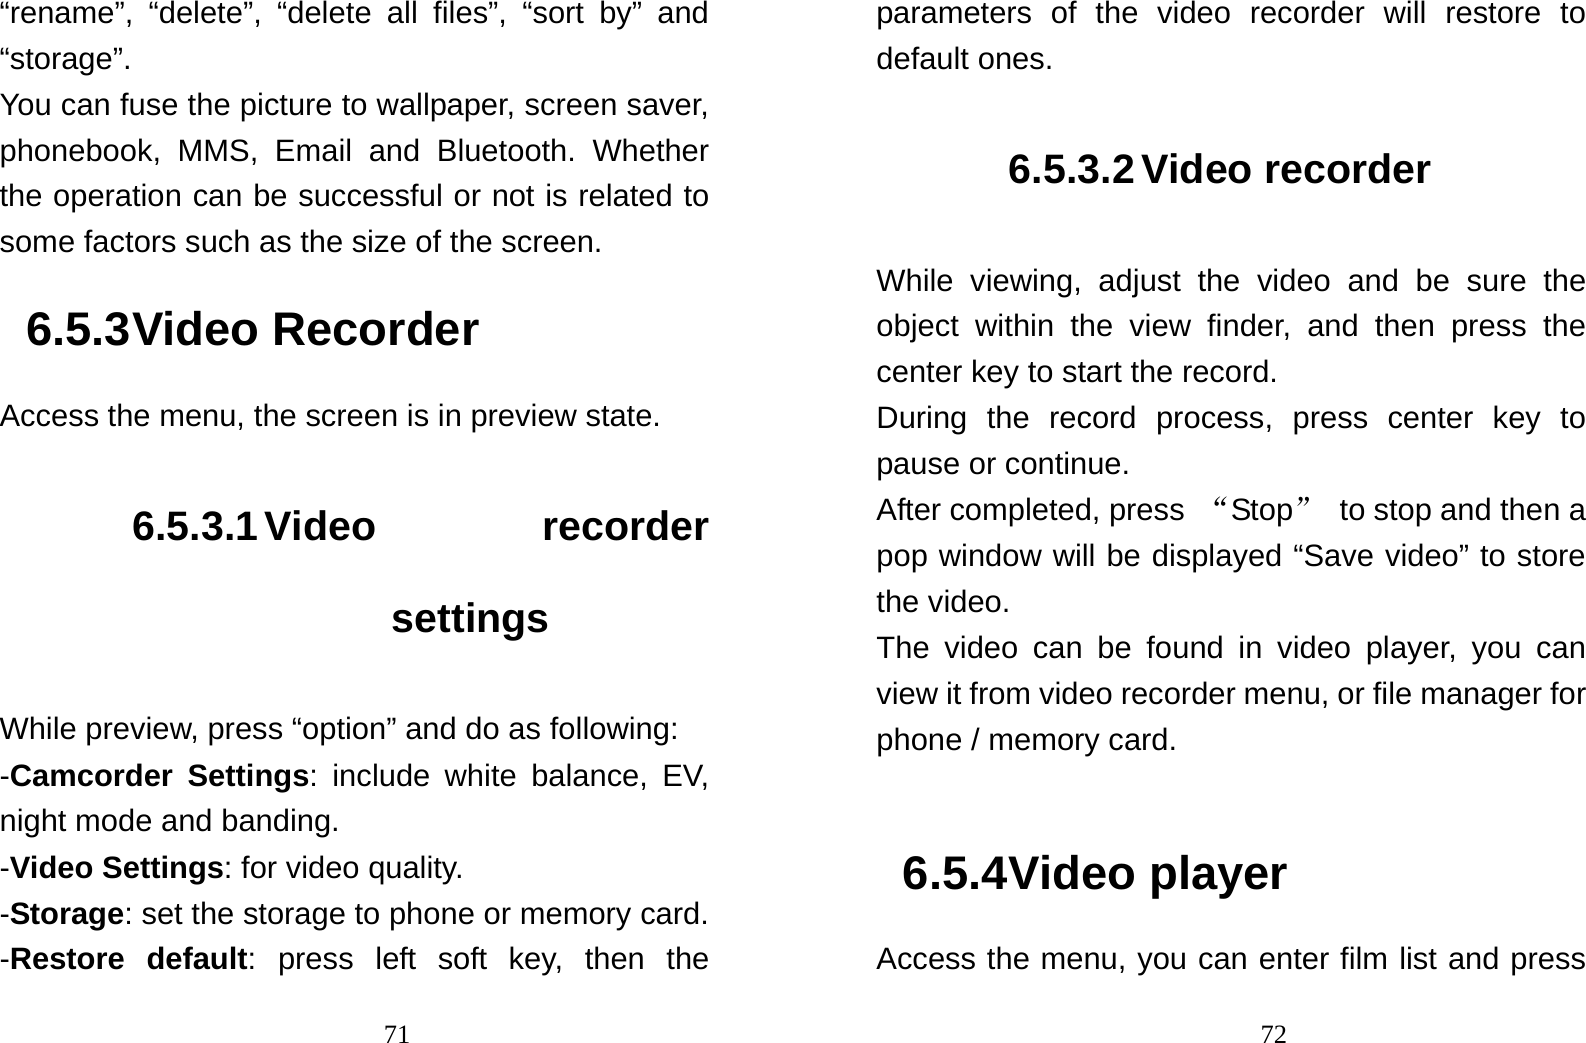                                71“rename”, “delete”, “delete all files”, “sort by” and “storage”. You can fuse the picture to wallpaper, screen saver, phonebook, MMS, Email and Bluetooth. Whether the operation can be successful or not is related to some factors such as the size of the screen. 6.5.3 Video Recorder Access the menu, the screen is in preview state. 6.5.3.1 Video  recorder settings While preview, press “option” and do as following: -Camcorder Settings: include white balance, EV, night mode and banding. -Video Settings: for video quality.  -Storage: set the storage to phone or memory card. -Restore default: press left soft key, then the                                72parameters of the video recorder will restore to default ones. 6.5.3.2 Video recorder While viewing, adjust the video and be sure the object within the view finder, and then press the center key to start the record. During the record process, press center key to pause or continue. After completed, press  “Stop” to stop and then a pop window will be displayed “Save video” to store the video.   The video can be found in video player, you can view it from video recorder menu, or file manager for phone / memory card.  6.5.4 Video player Access the menu, you can enter film list and press 